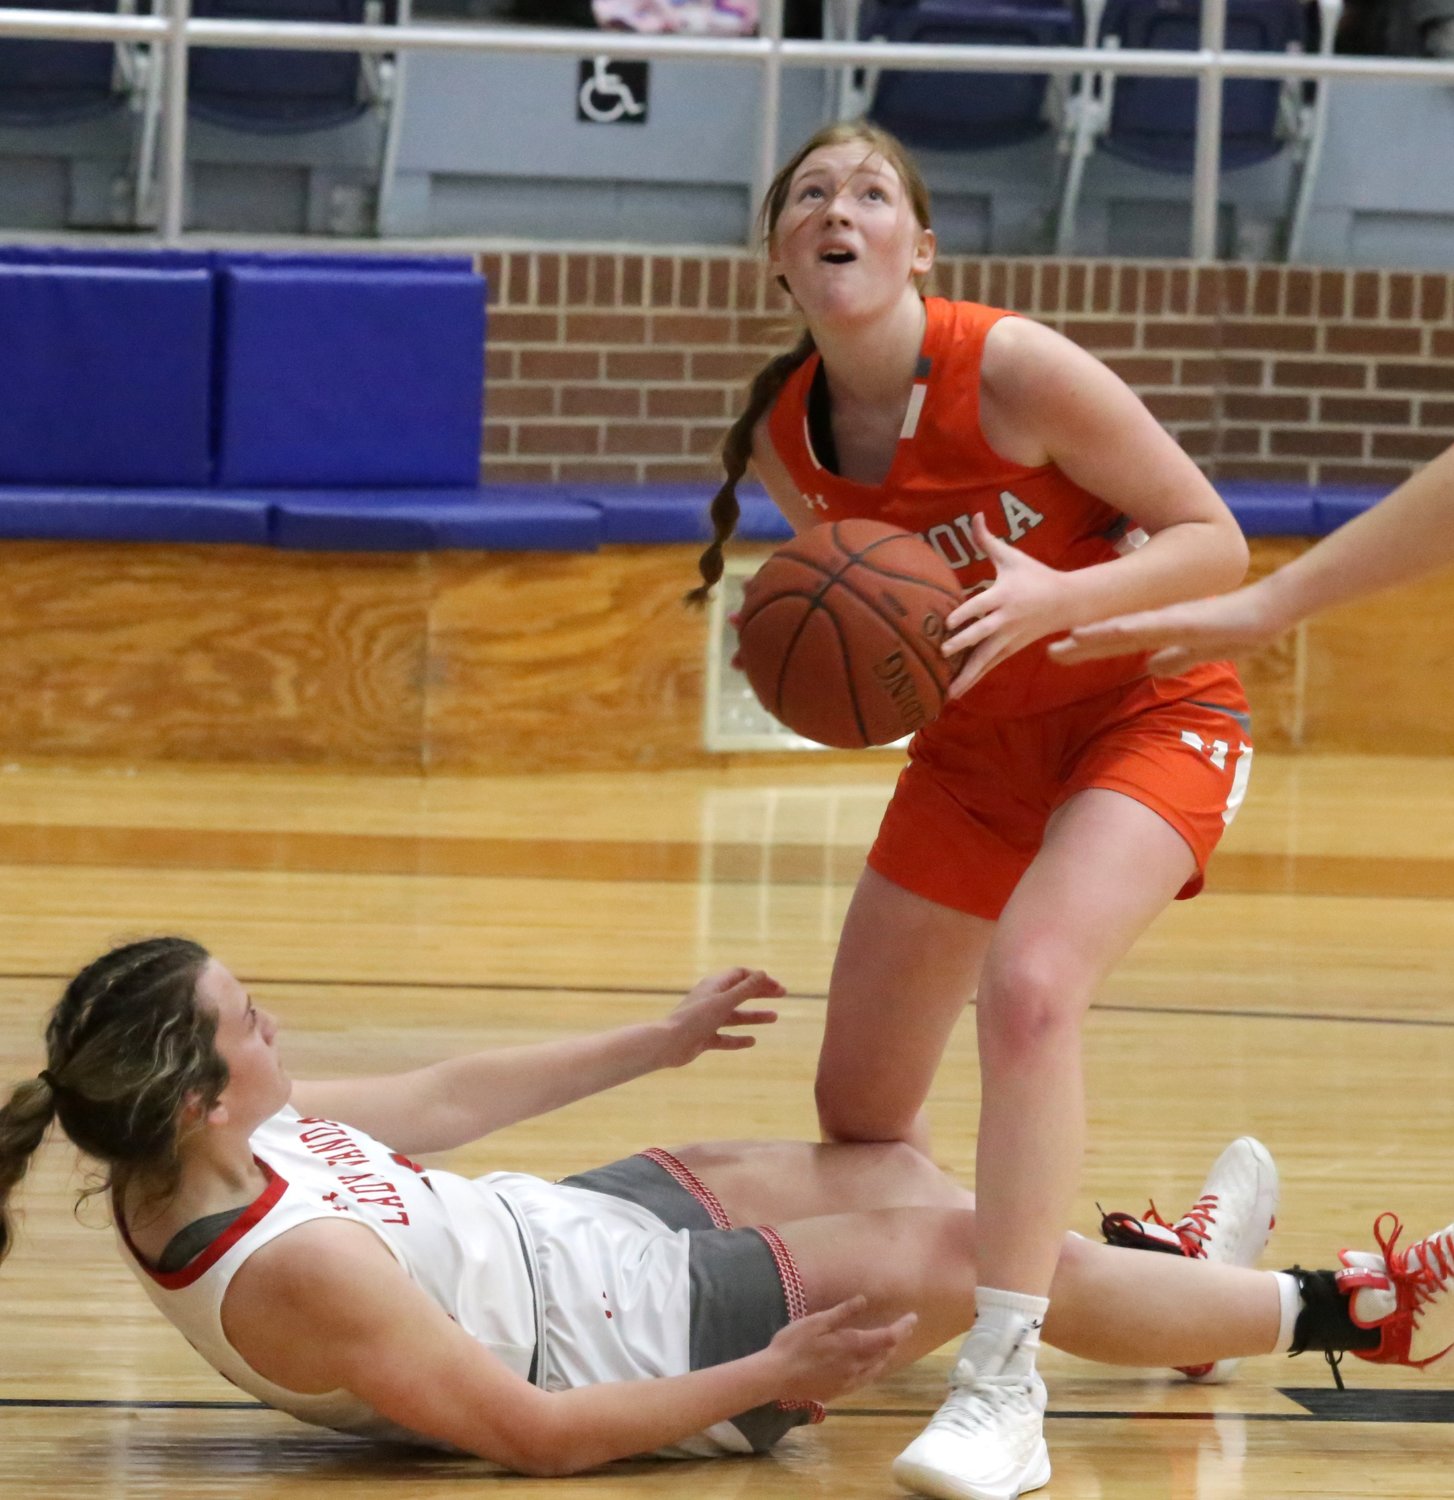 Mineola’s Macy Fischer powers her way to the hoop in action against Van in the Wills Point tournament. In other tournament games, Mineola defeated Ferris 54-26, lost to Forney 39-31 and defeated Wills Point 50-28.